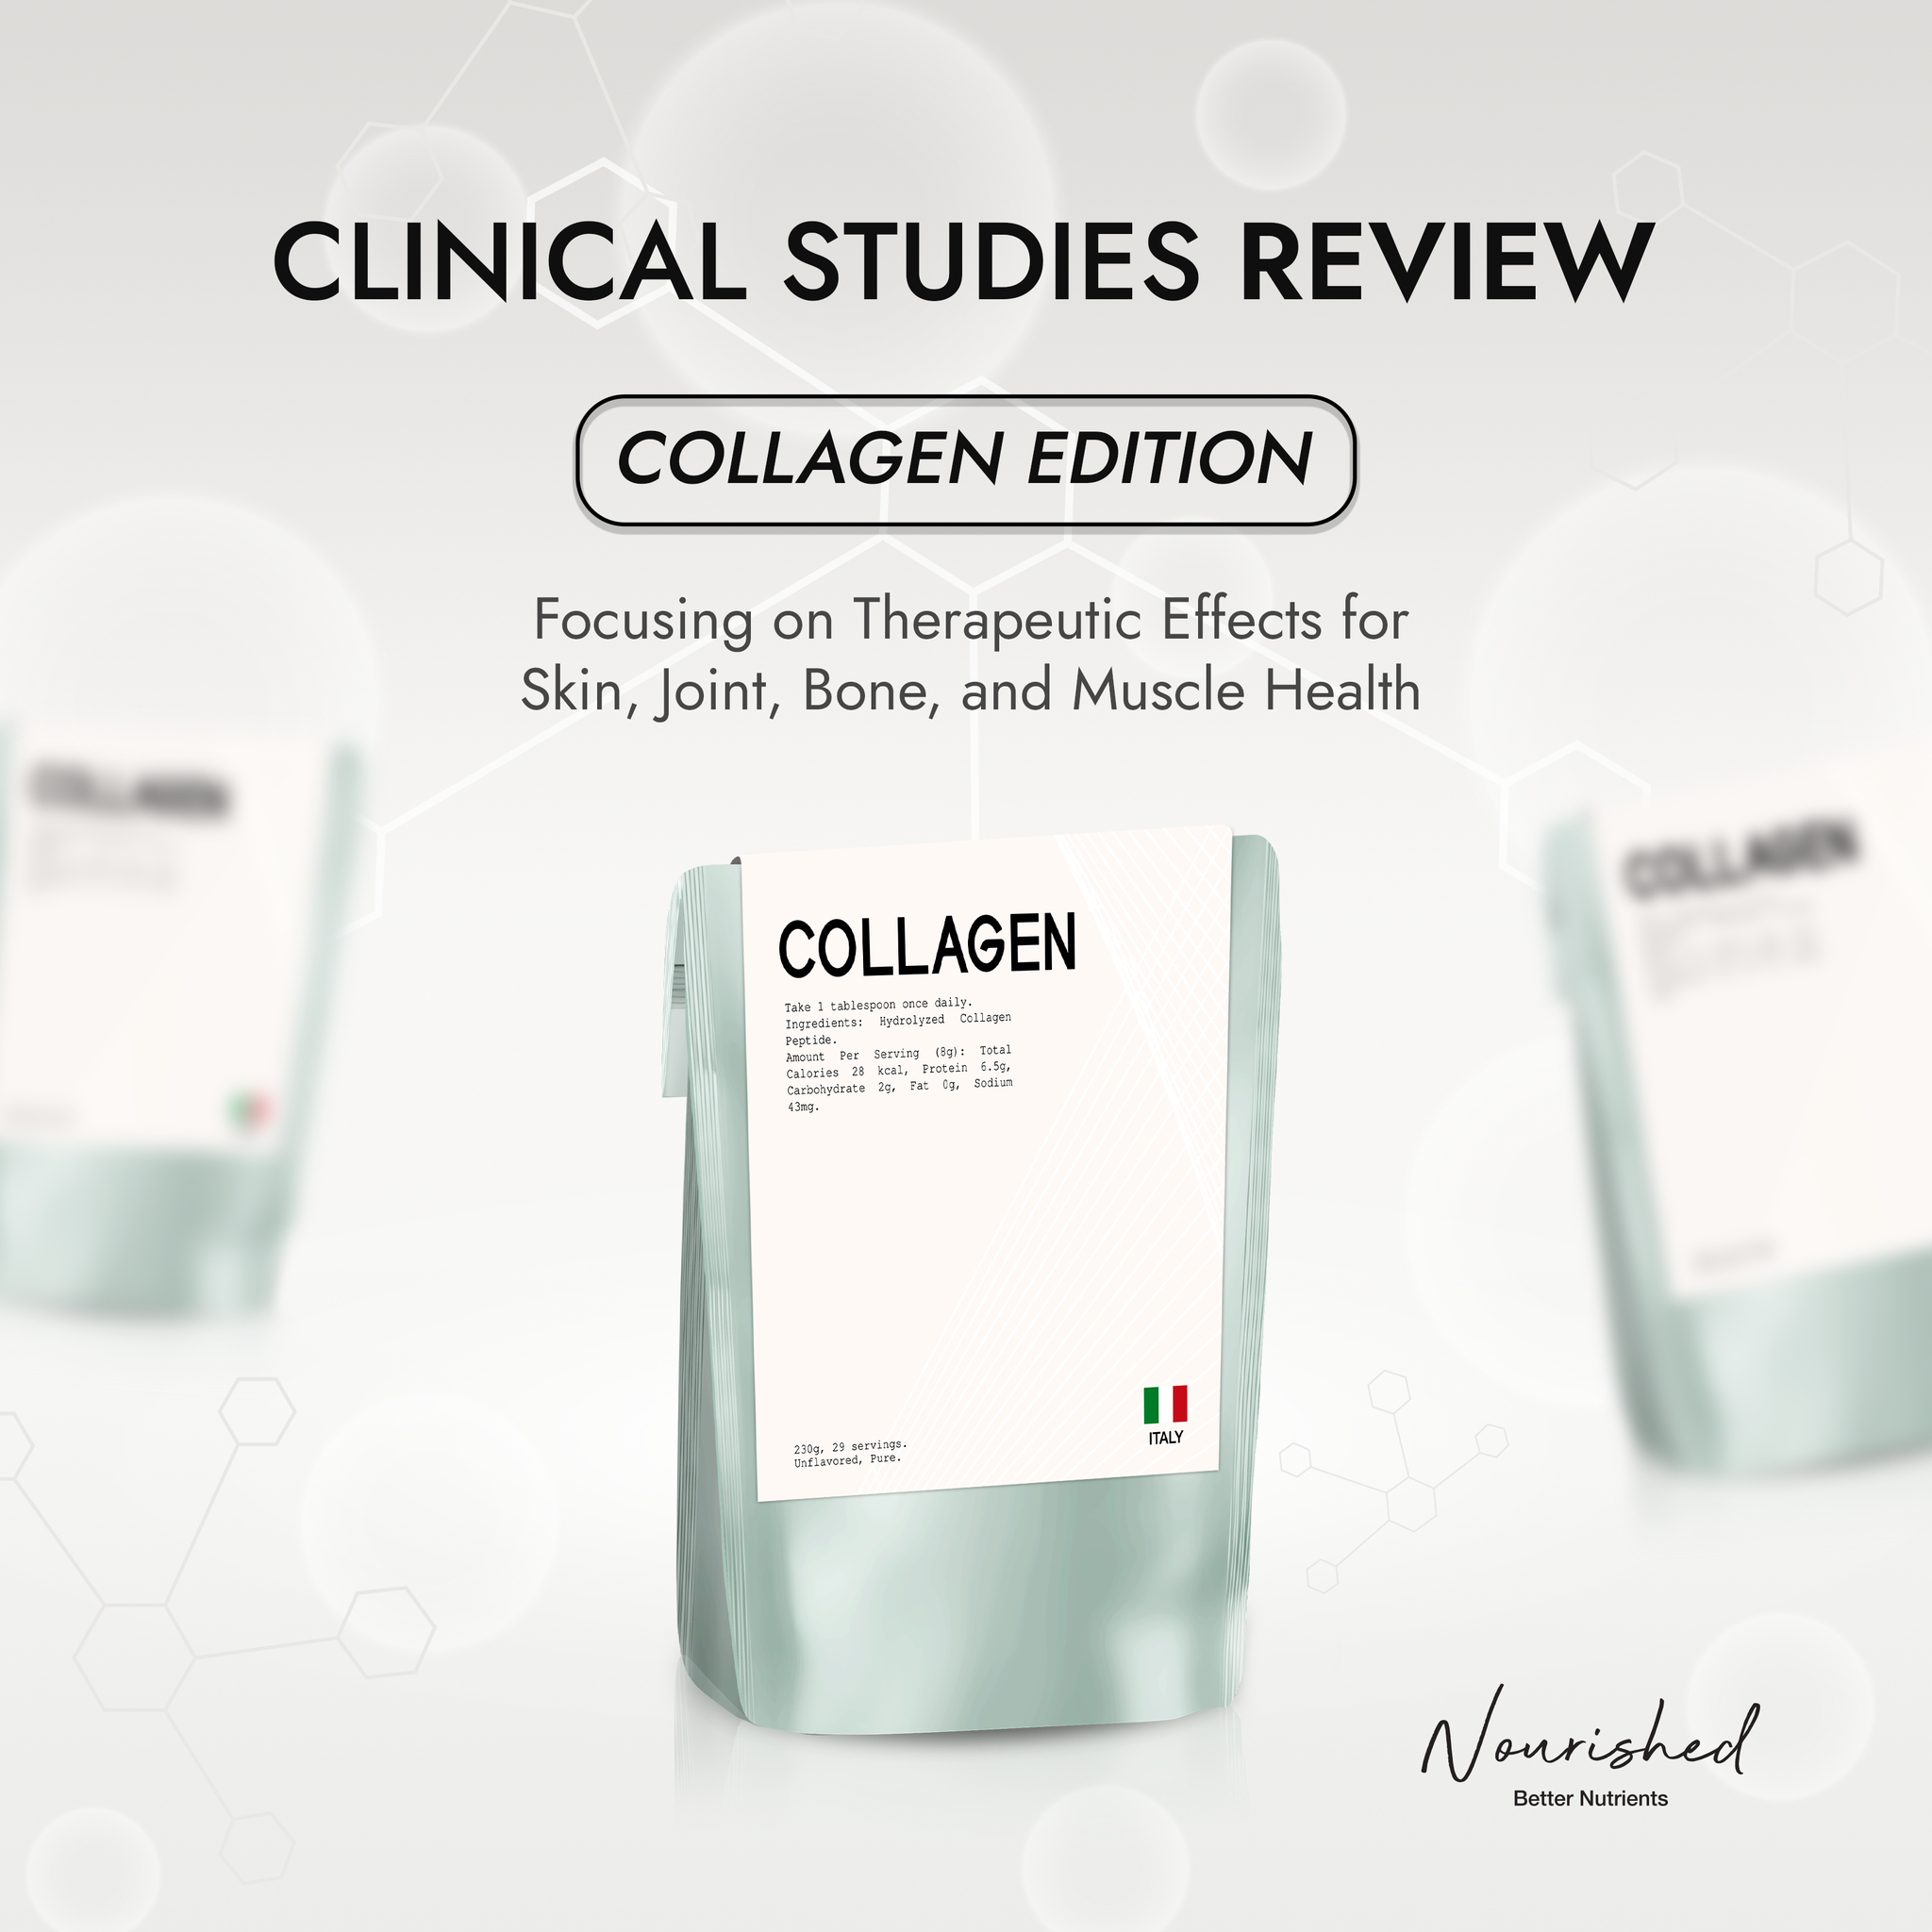 COLLAGEN PEPTIDE: A Review of Clinical Studies on its Therapeutic Effects for Joint, Skin, Bone, and Muscle Health